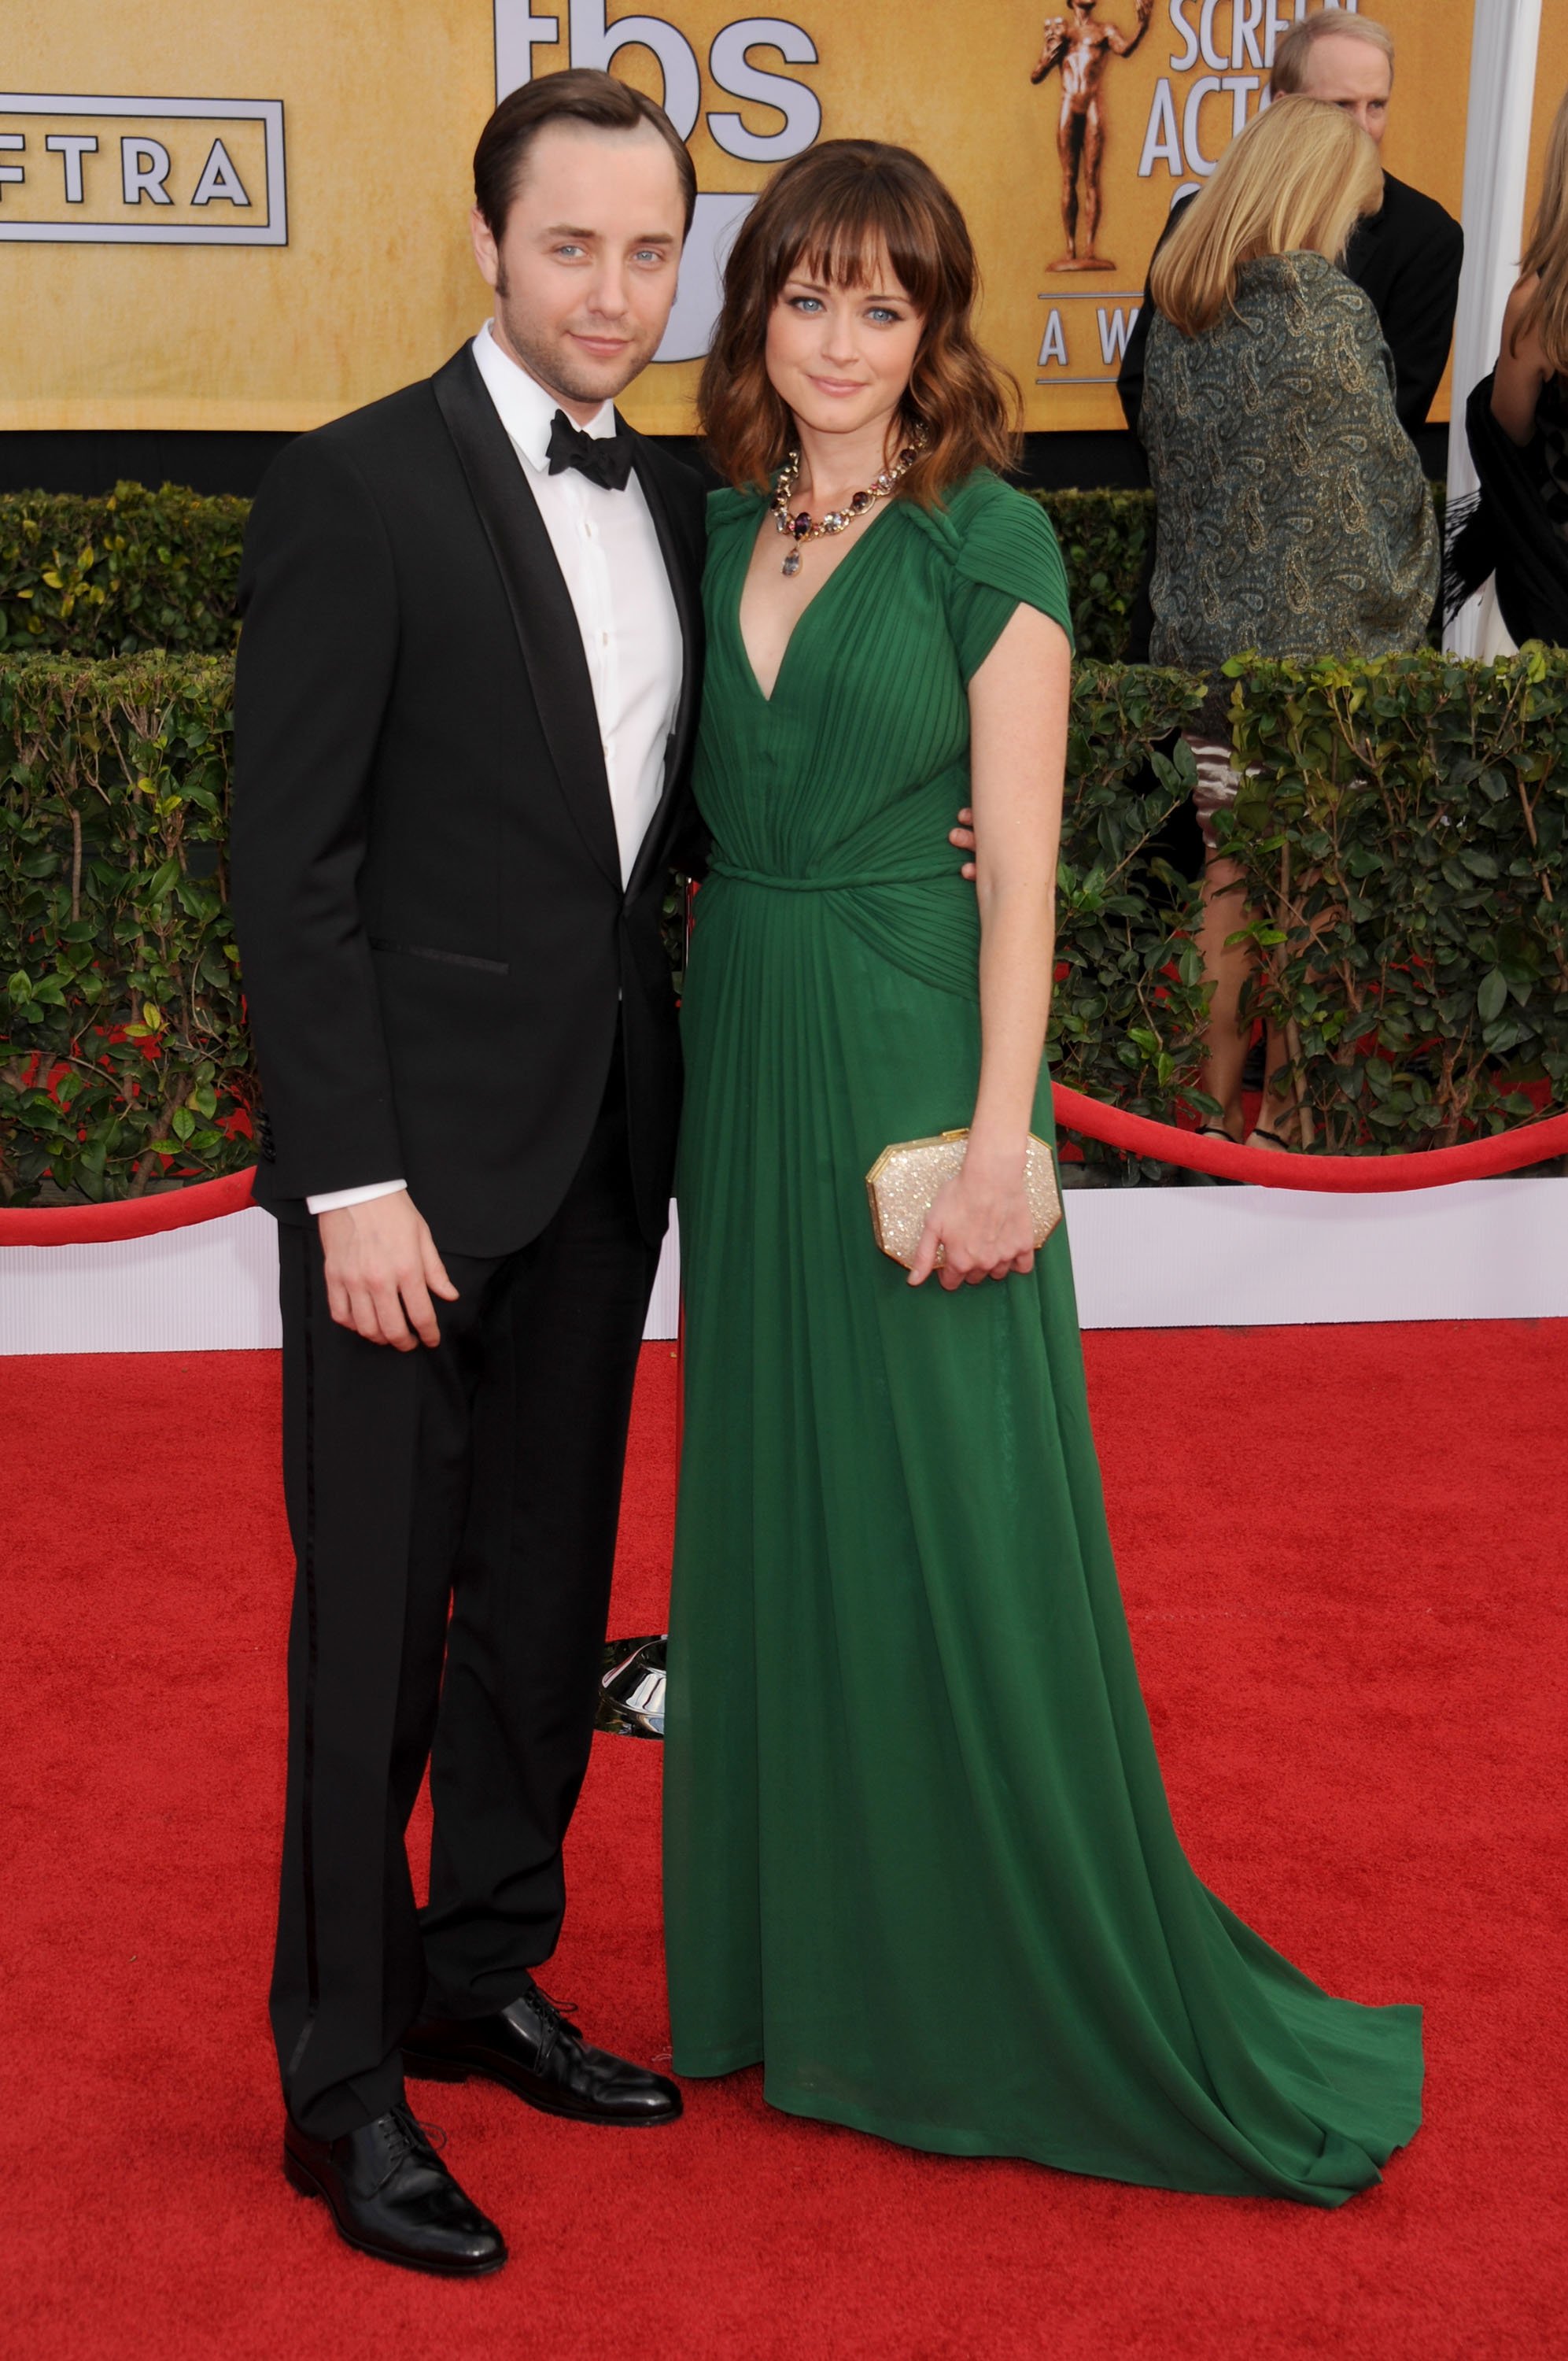 Alexis Bledel and Vincent Kartheiser at the 19th Annual Screen Actors Guild Awards in California on January 27, 2013. | Source: Getty Images 